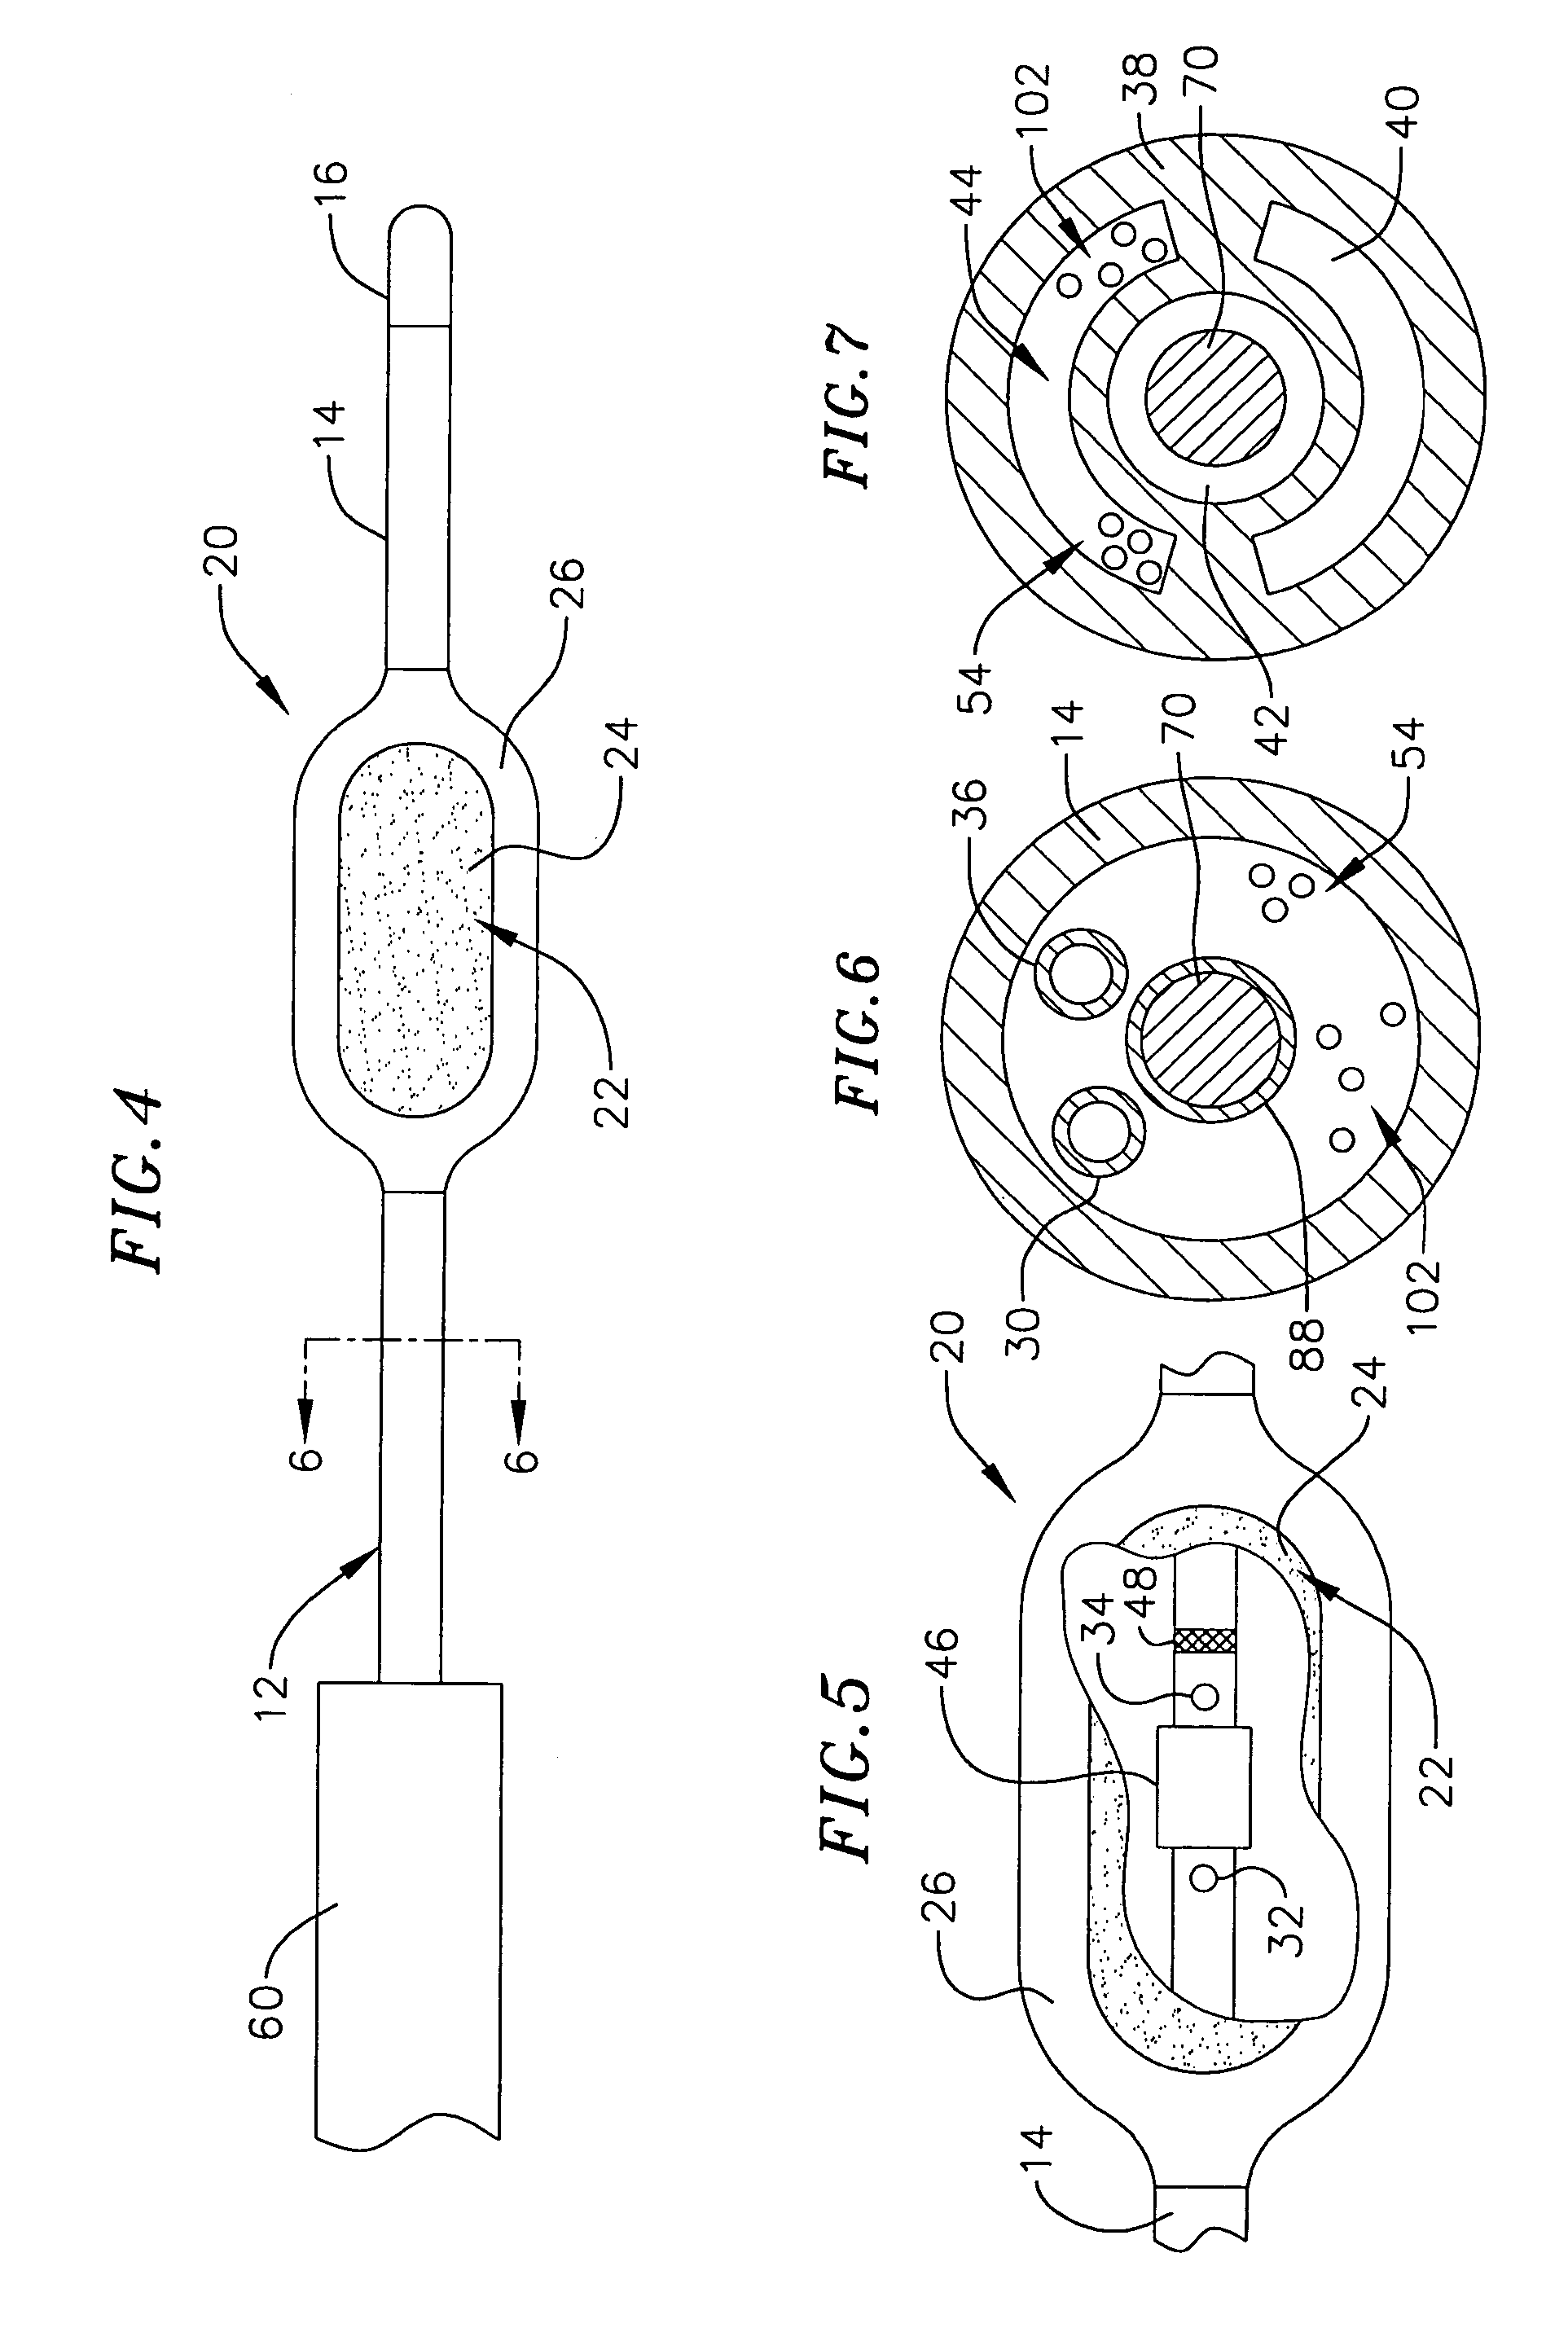 Loop structure including inflatable therapeutic device